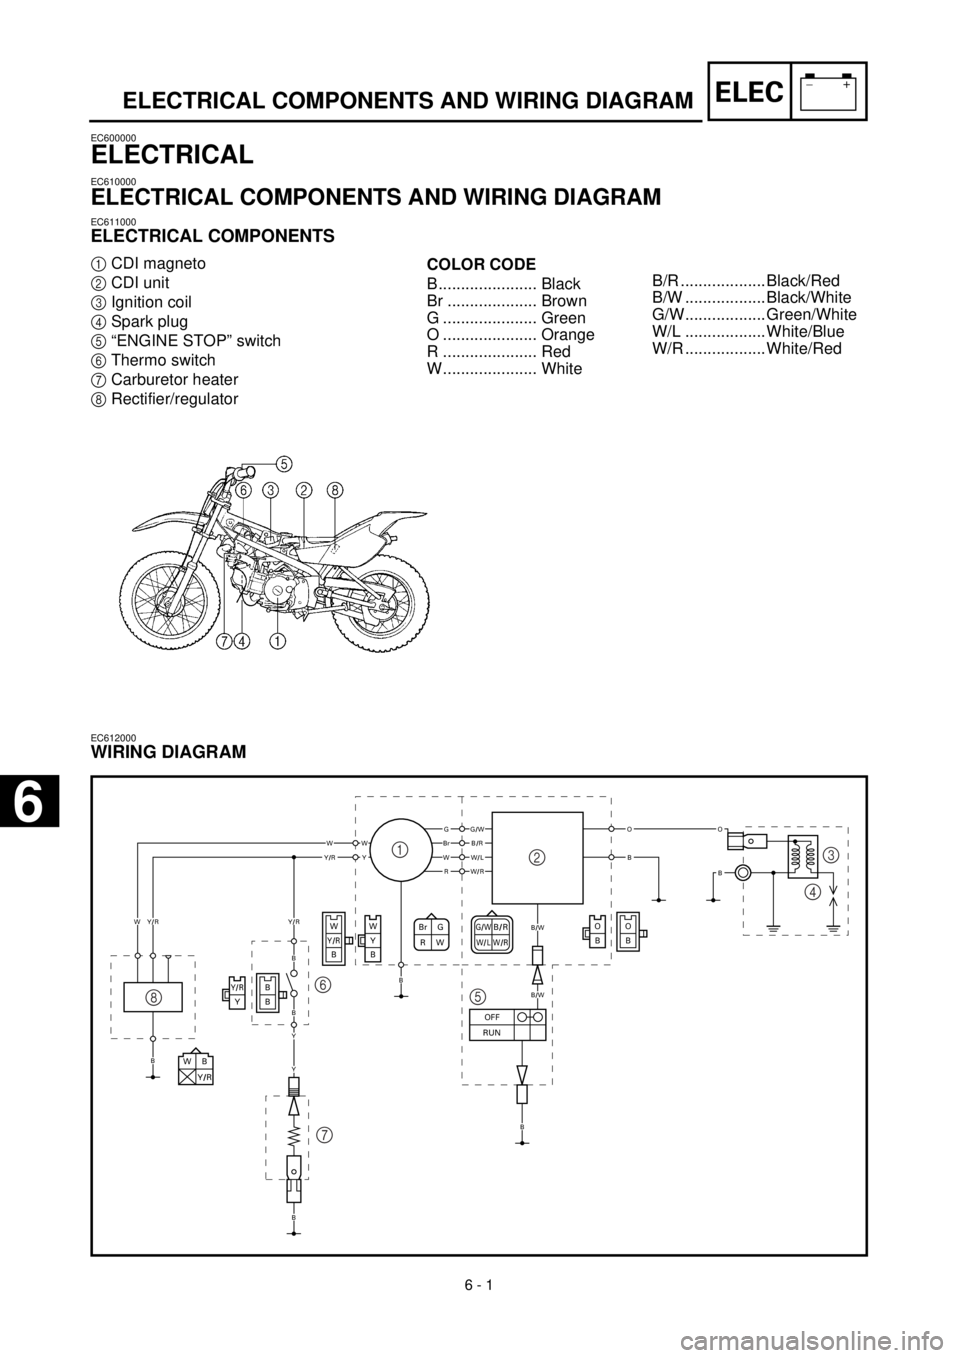 YAMAHA TTR90 2000  Notices Demploi (in French)  
6 - 1
–+ELEC
 
ELECTRICAL COMPONENTS AND WIRING DIAGRAM 
EC600000 
ELECTRICAL 
EC610000 
ELECTRICAL COMPONENTS AND WIRING DIAGRAM 
EC611000 
ELECTRICAL COMPONENTS 
1  
CDI magneto  
2  
CDI unit  